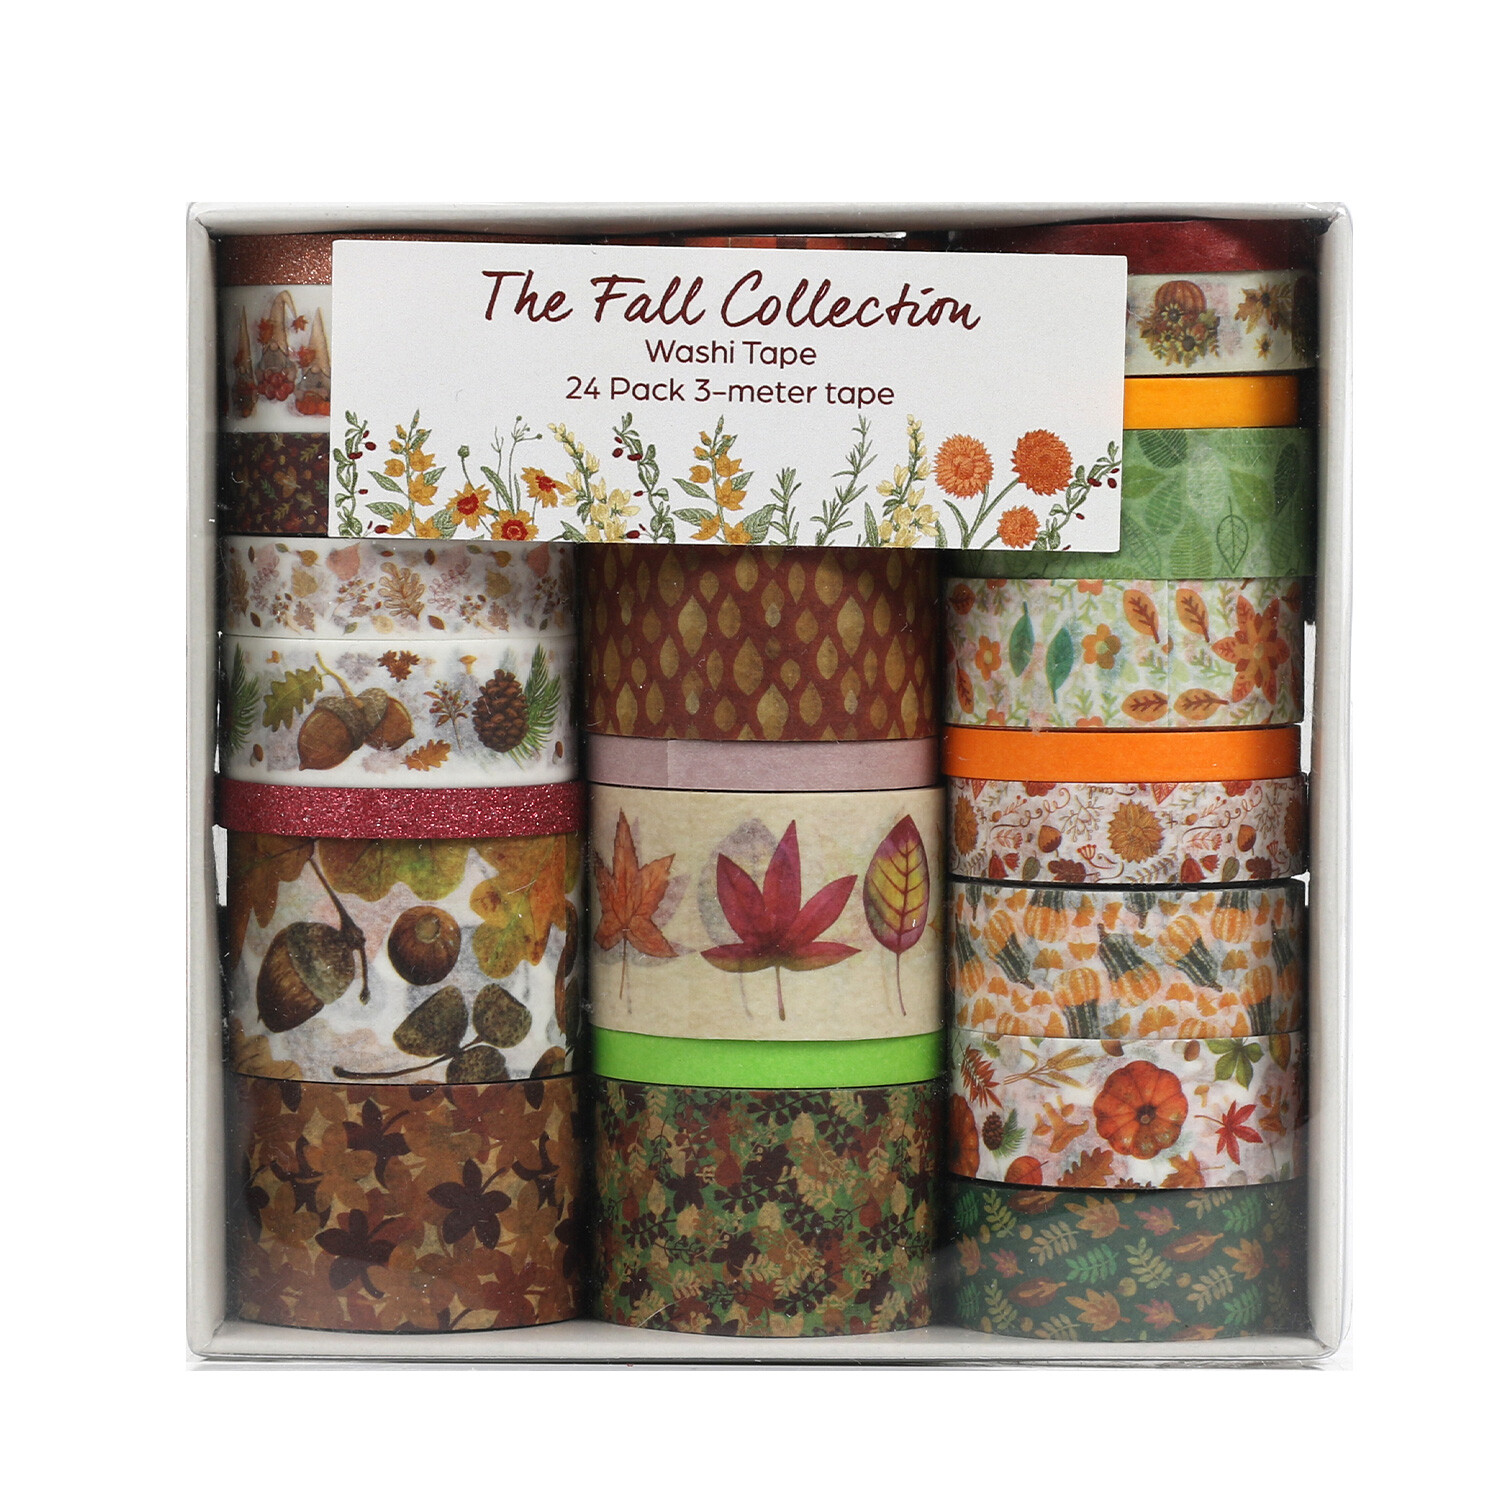 The Fall Collection Washi Tape Image